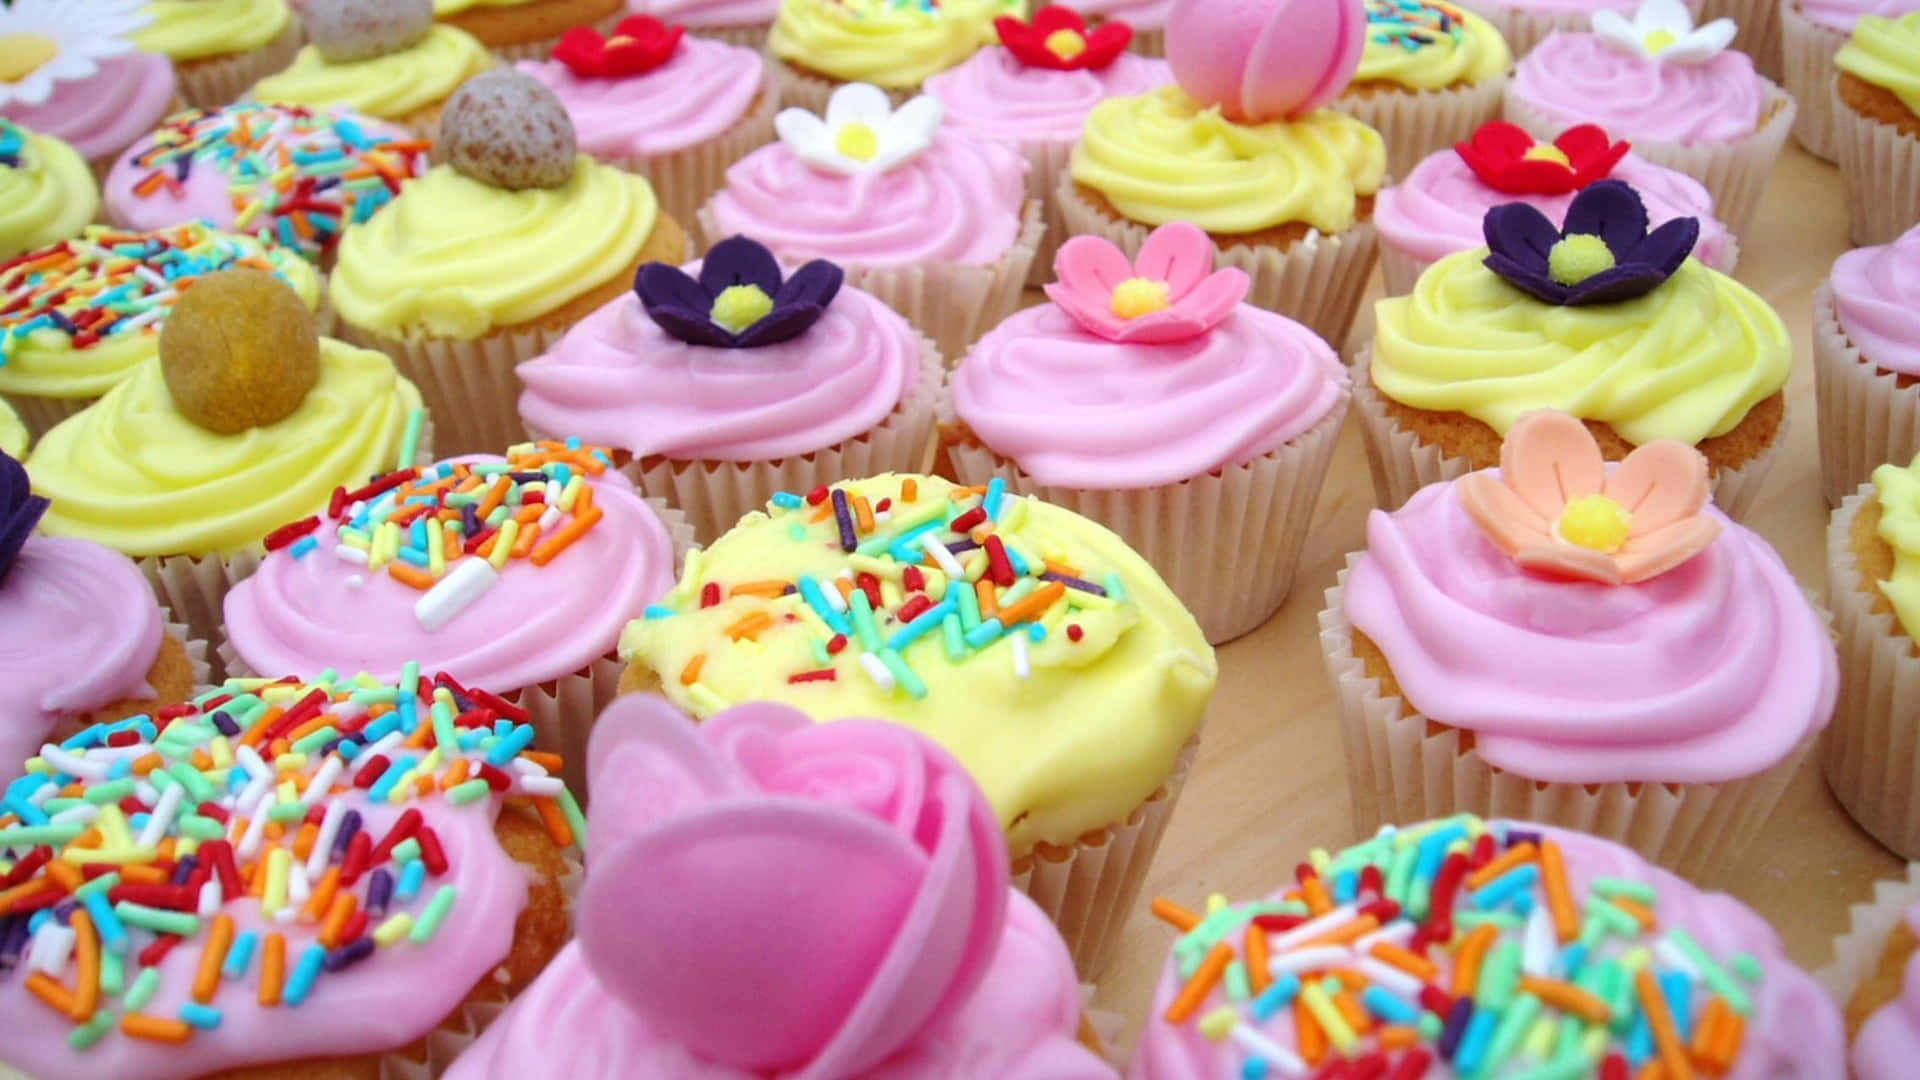 Yummy Cupcakes With Flowers And Sprinkles Background